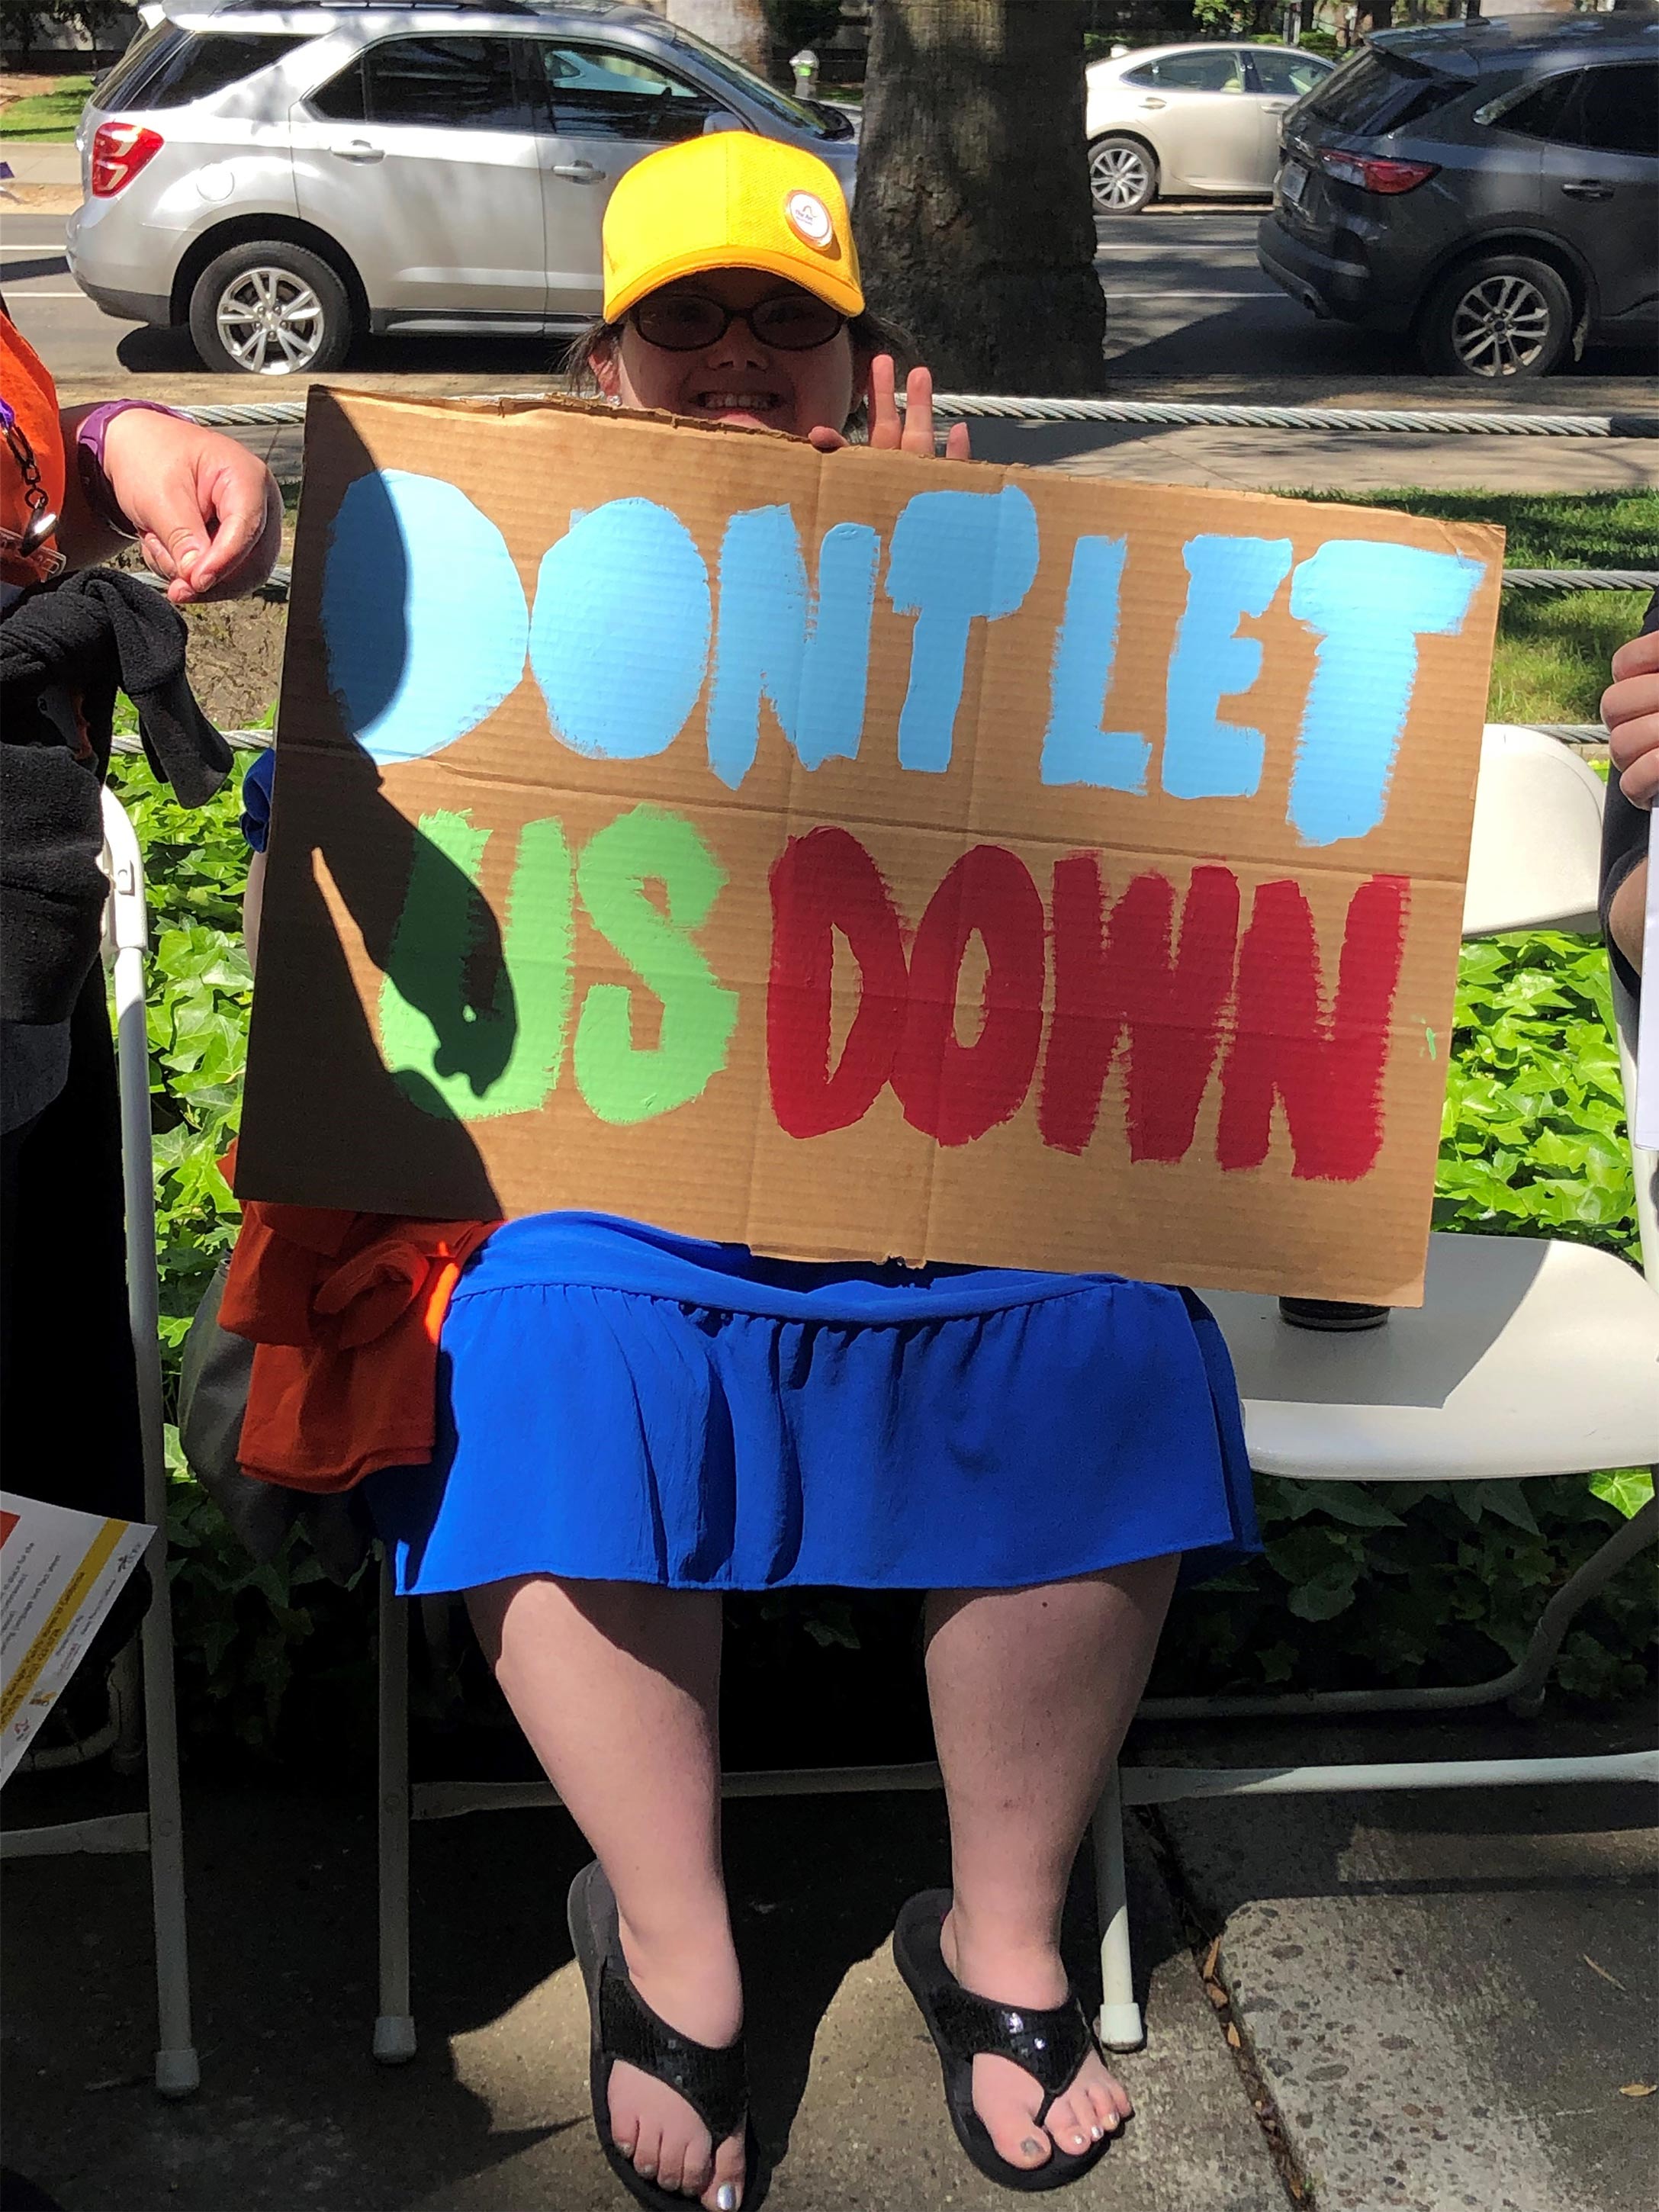 A photo of an demonstrator sitting and holding a sign that reads, "Don't let us down."